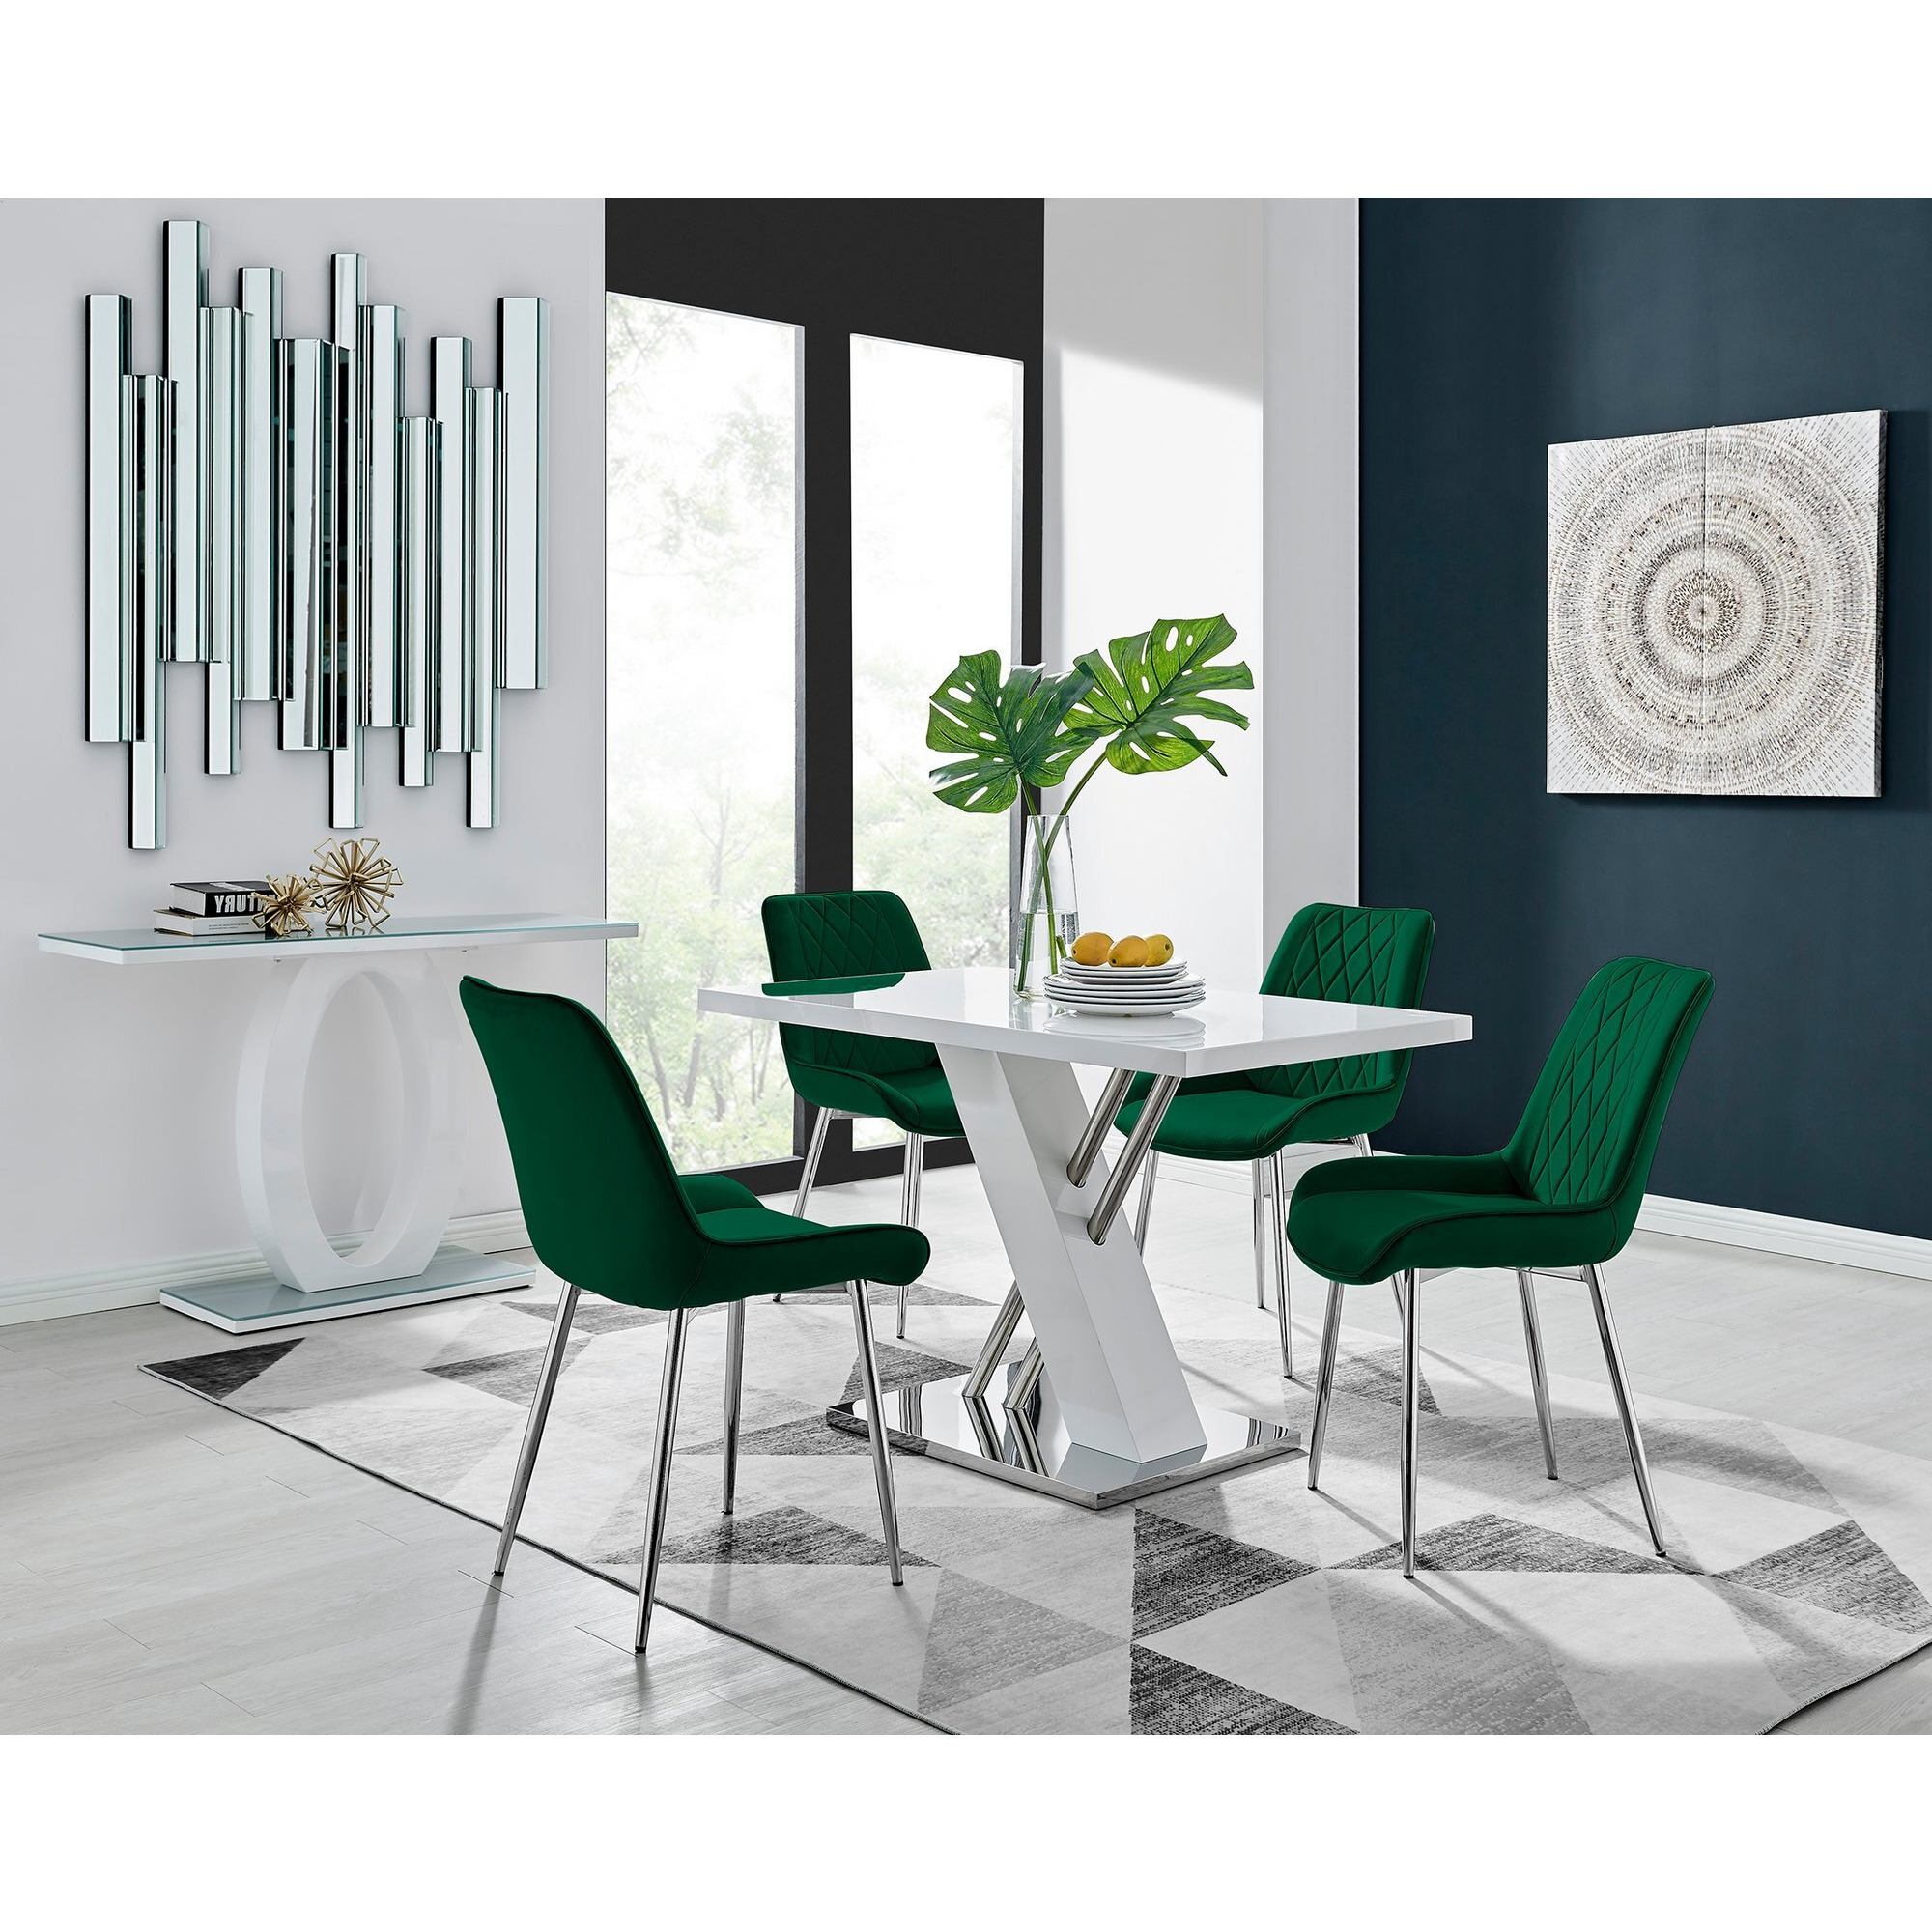 Sorrento 4 White Dining Table and 4 Pesaro Silver Leg Chairs